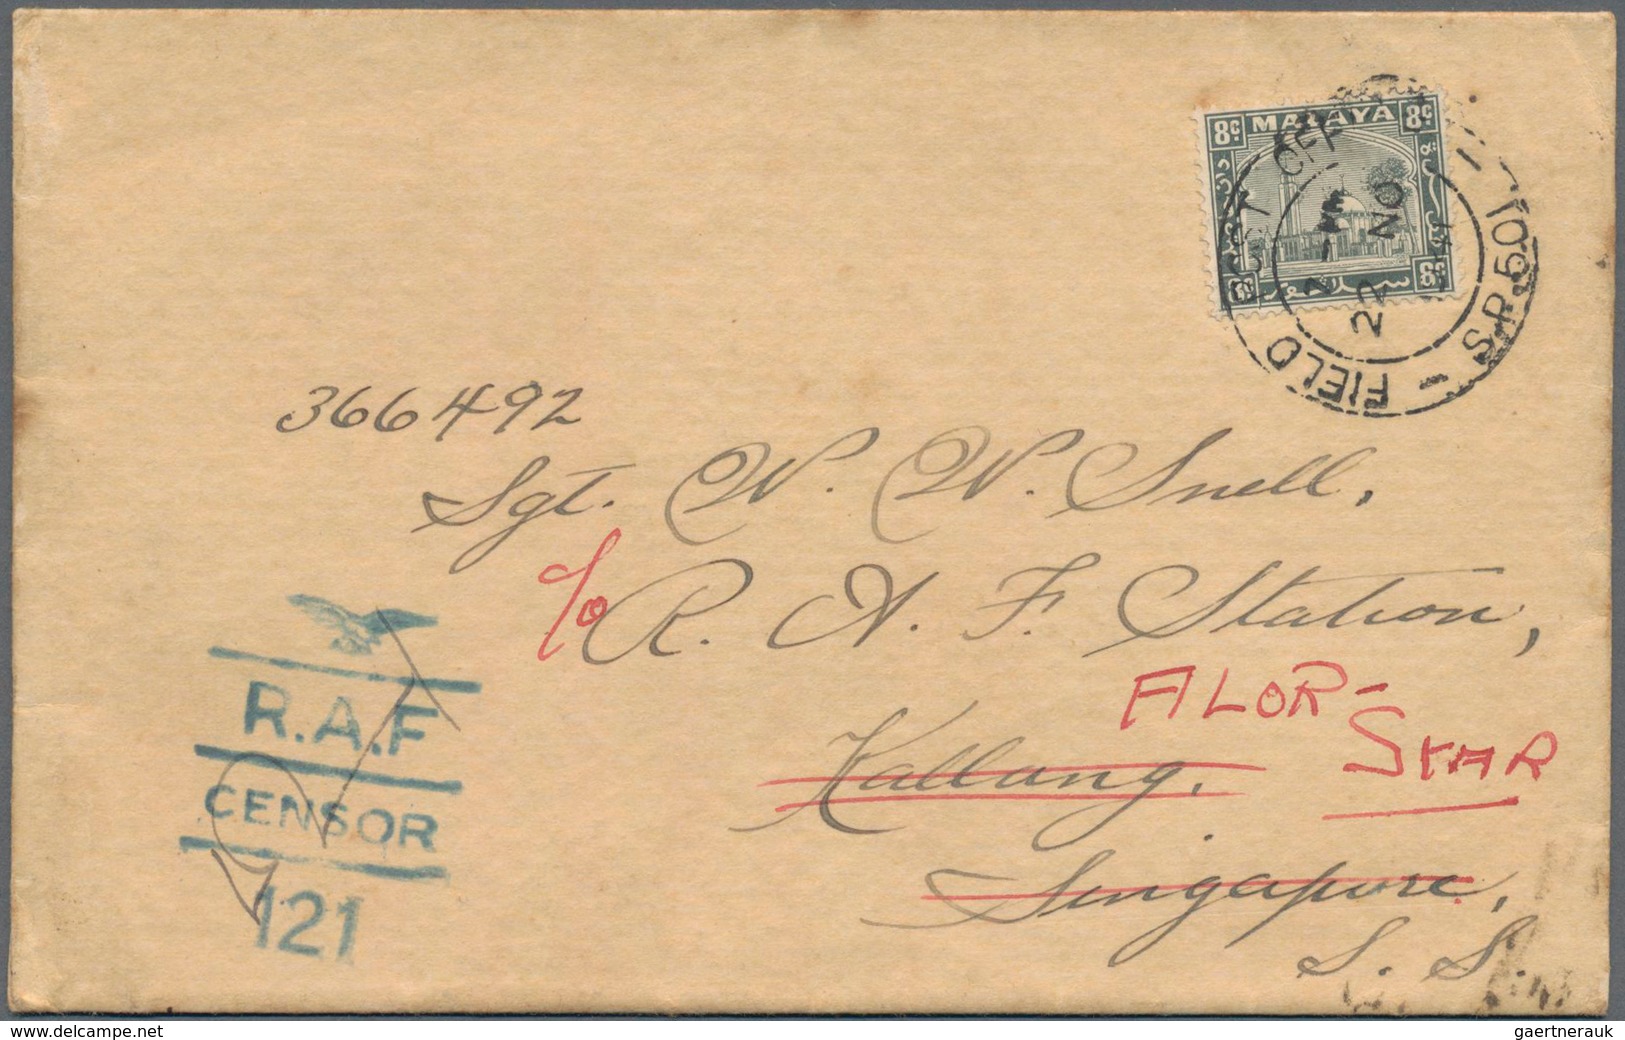 Malaiische Staaten - Selangor: 1941 R.A.F. Censored Cover To R.A.F. Station Kallang, Re-directed To - Selangor